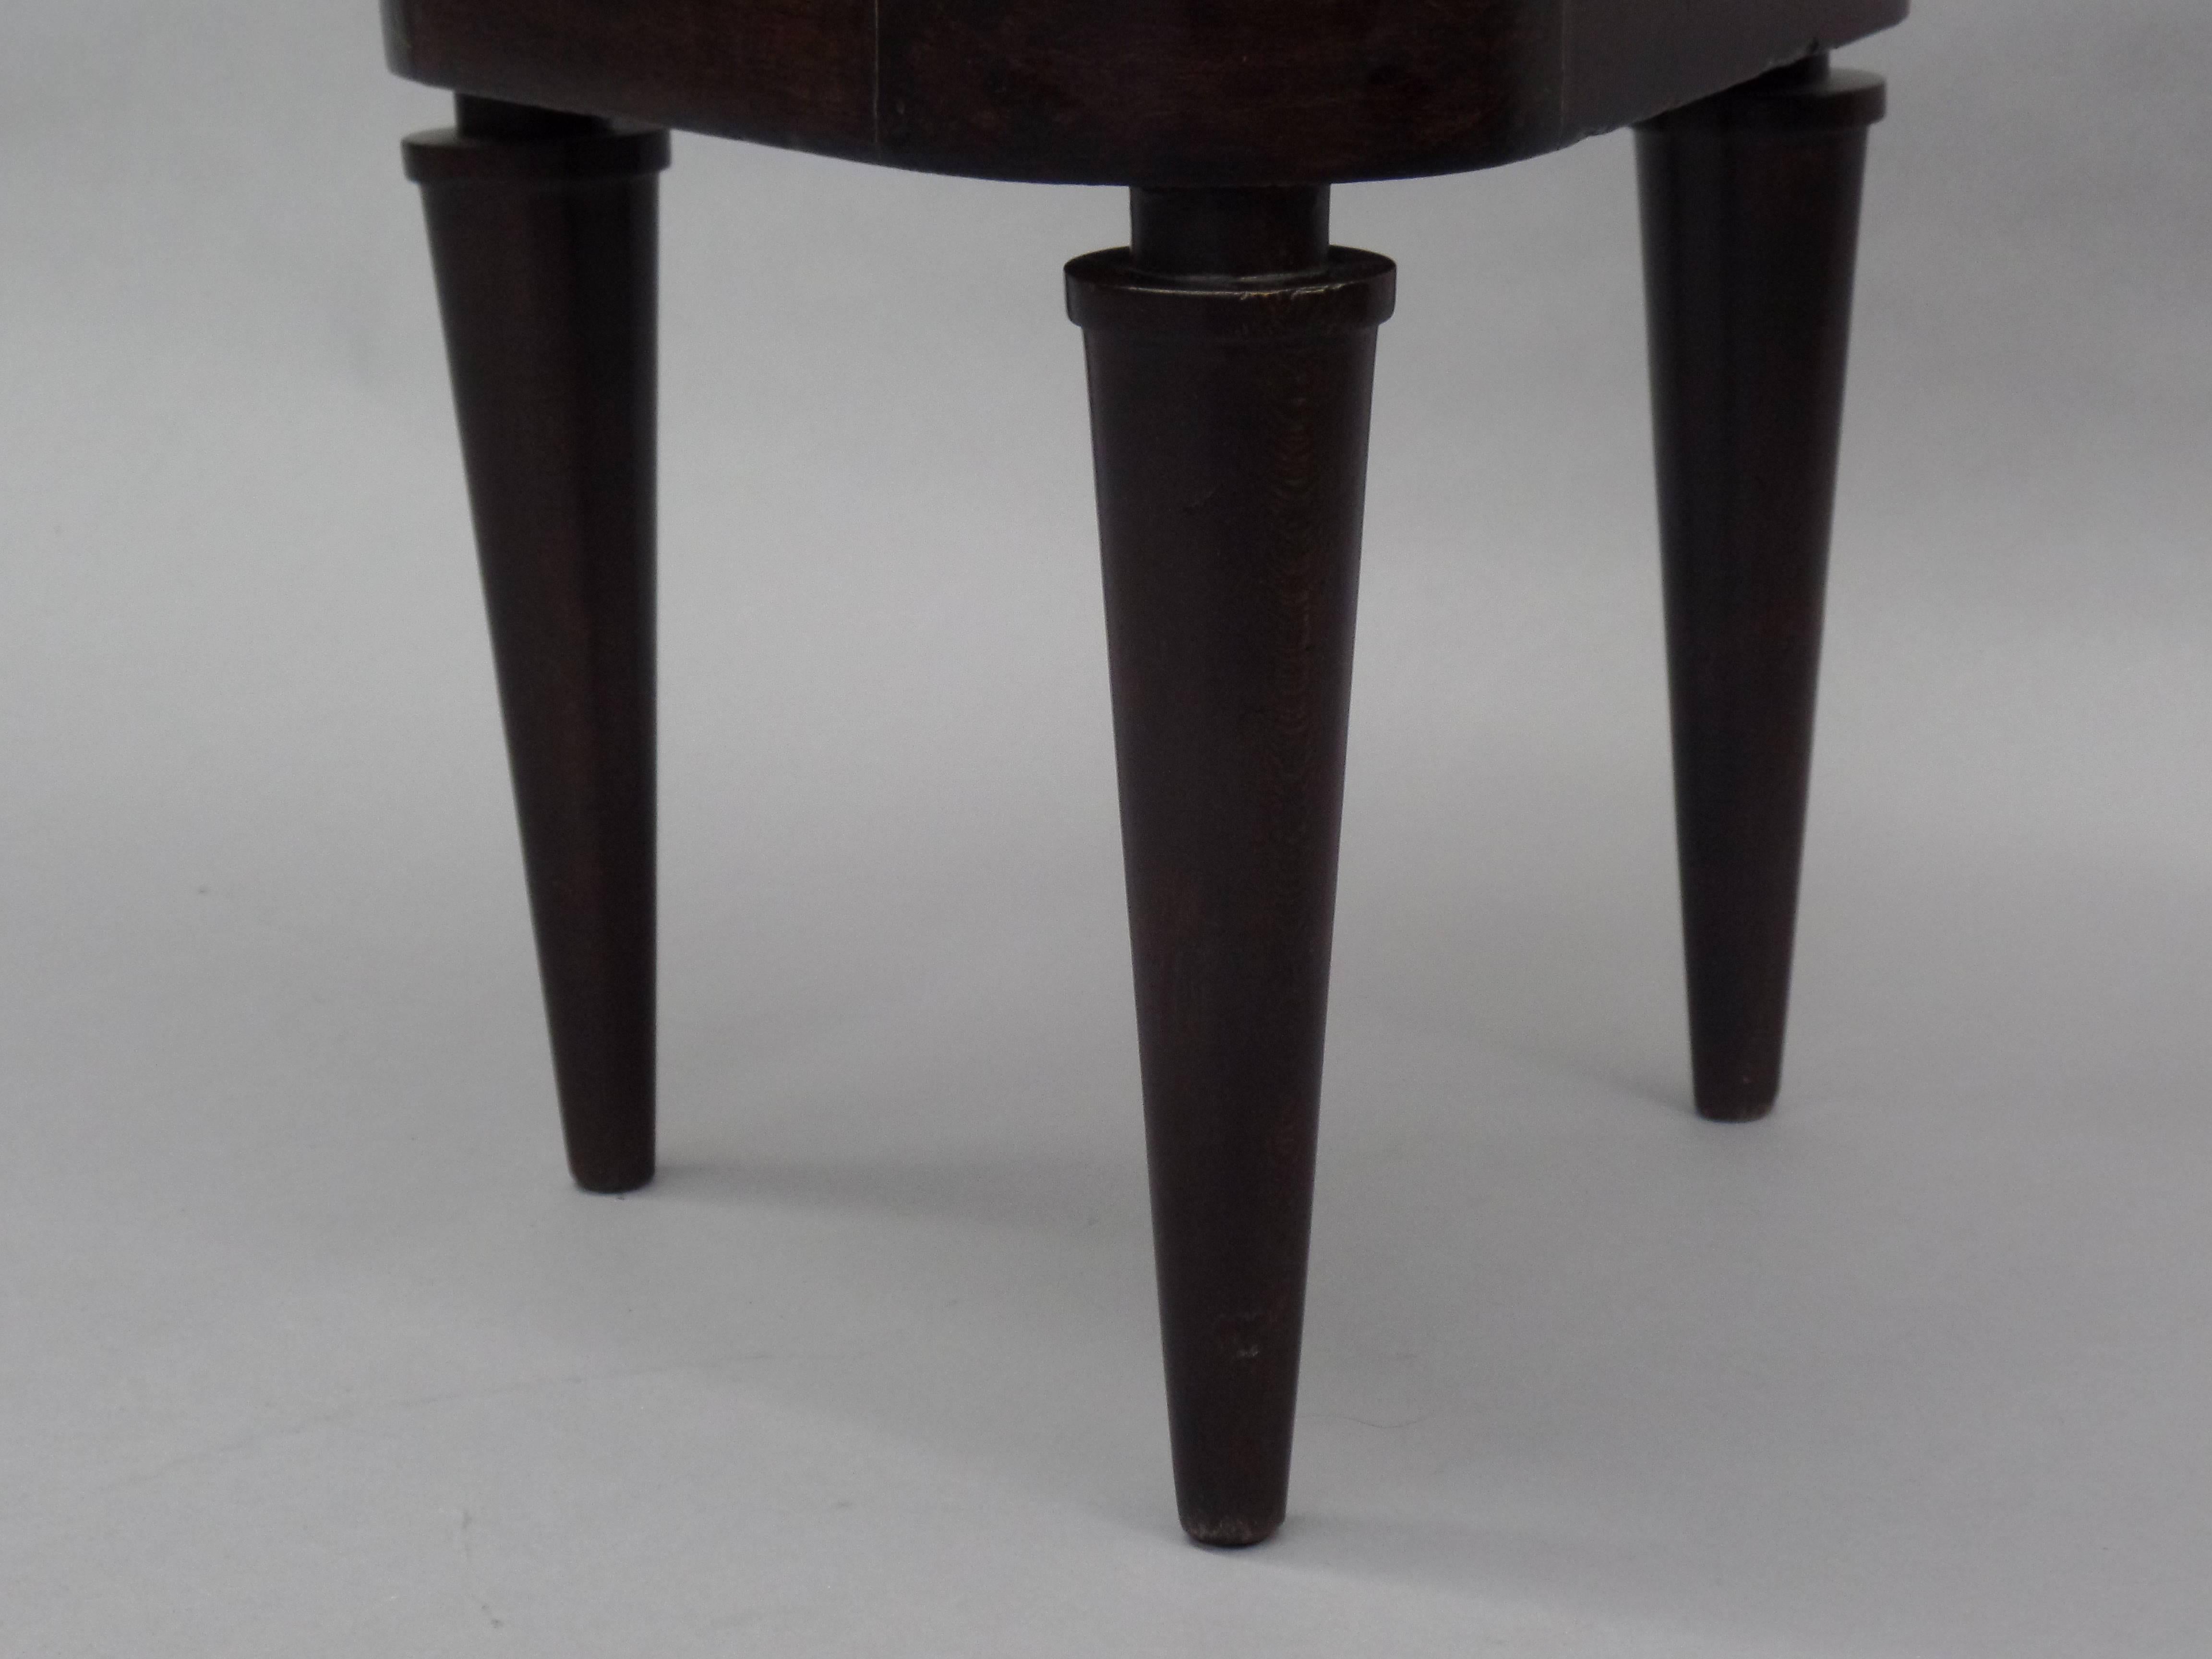 French Modern Neoclassical Mahogany and Suede Tri-Corner Stools, Andre Arbus For Sale 2